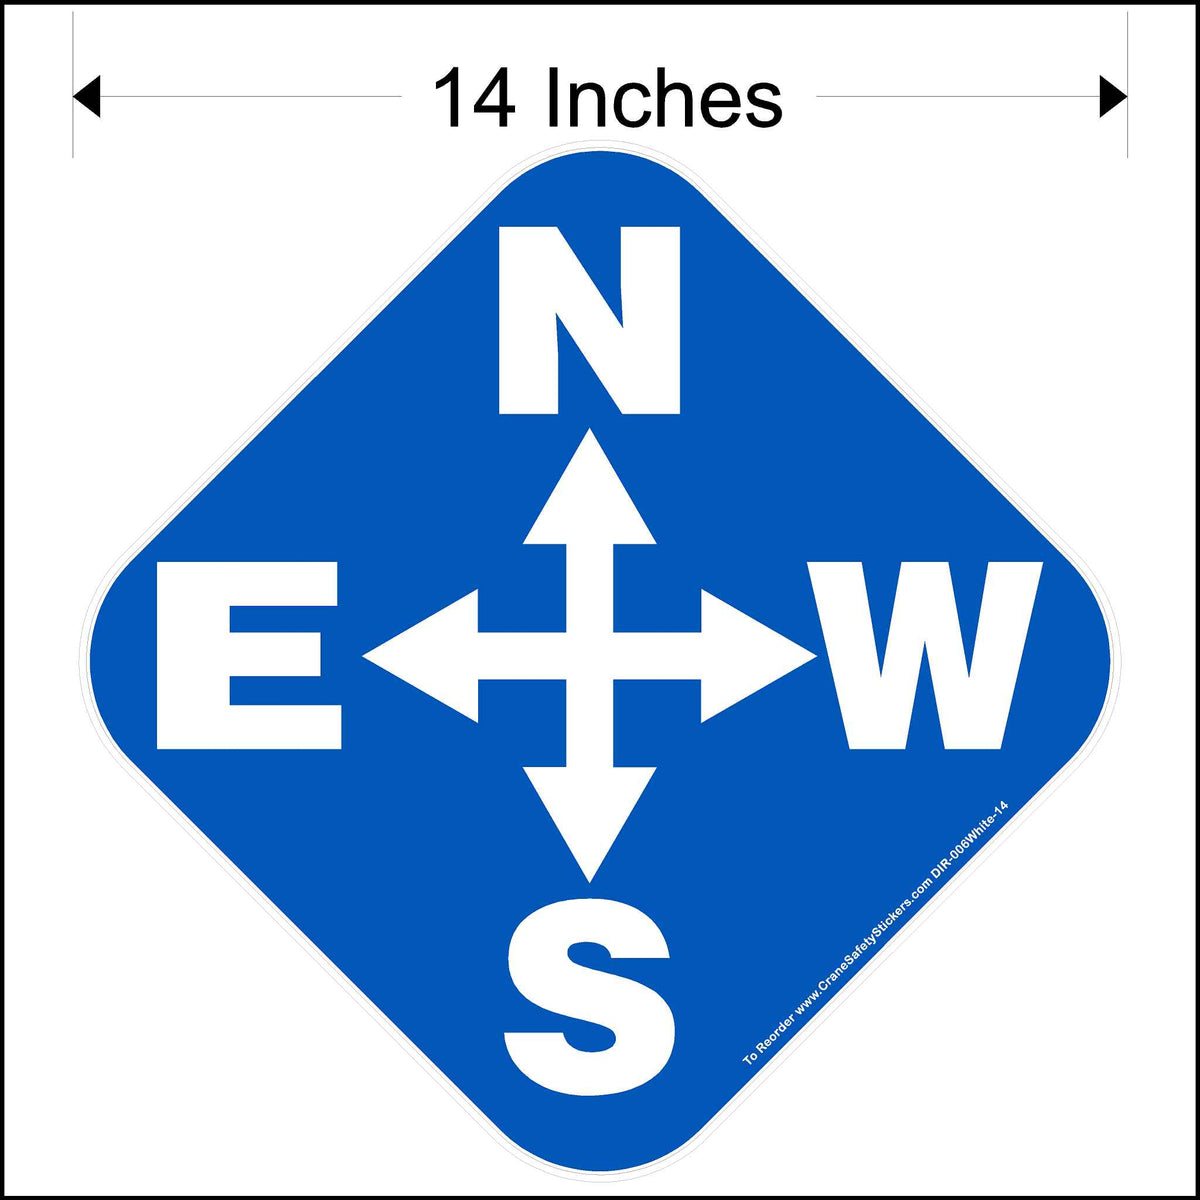 Overhead directional crane decal with white lettering and blue background. Decal size is 14 inches square.